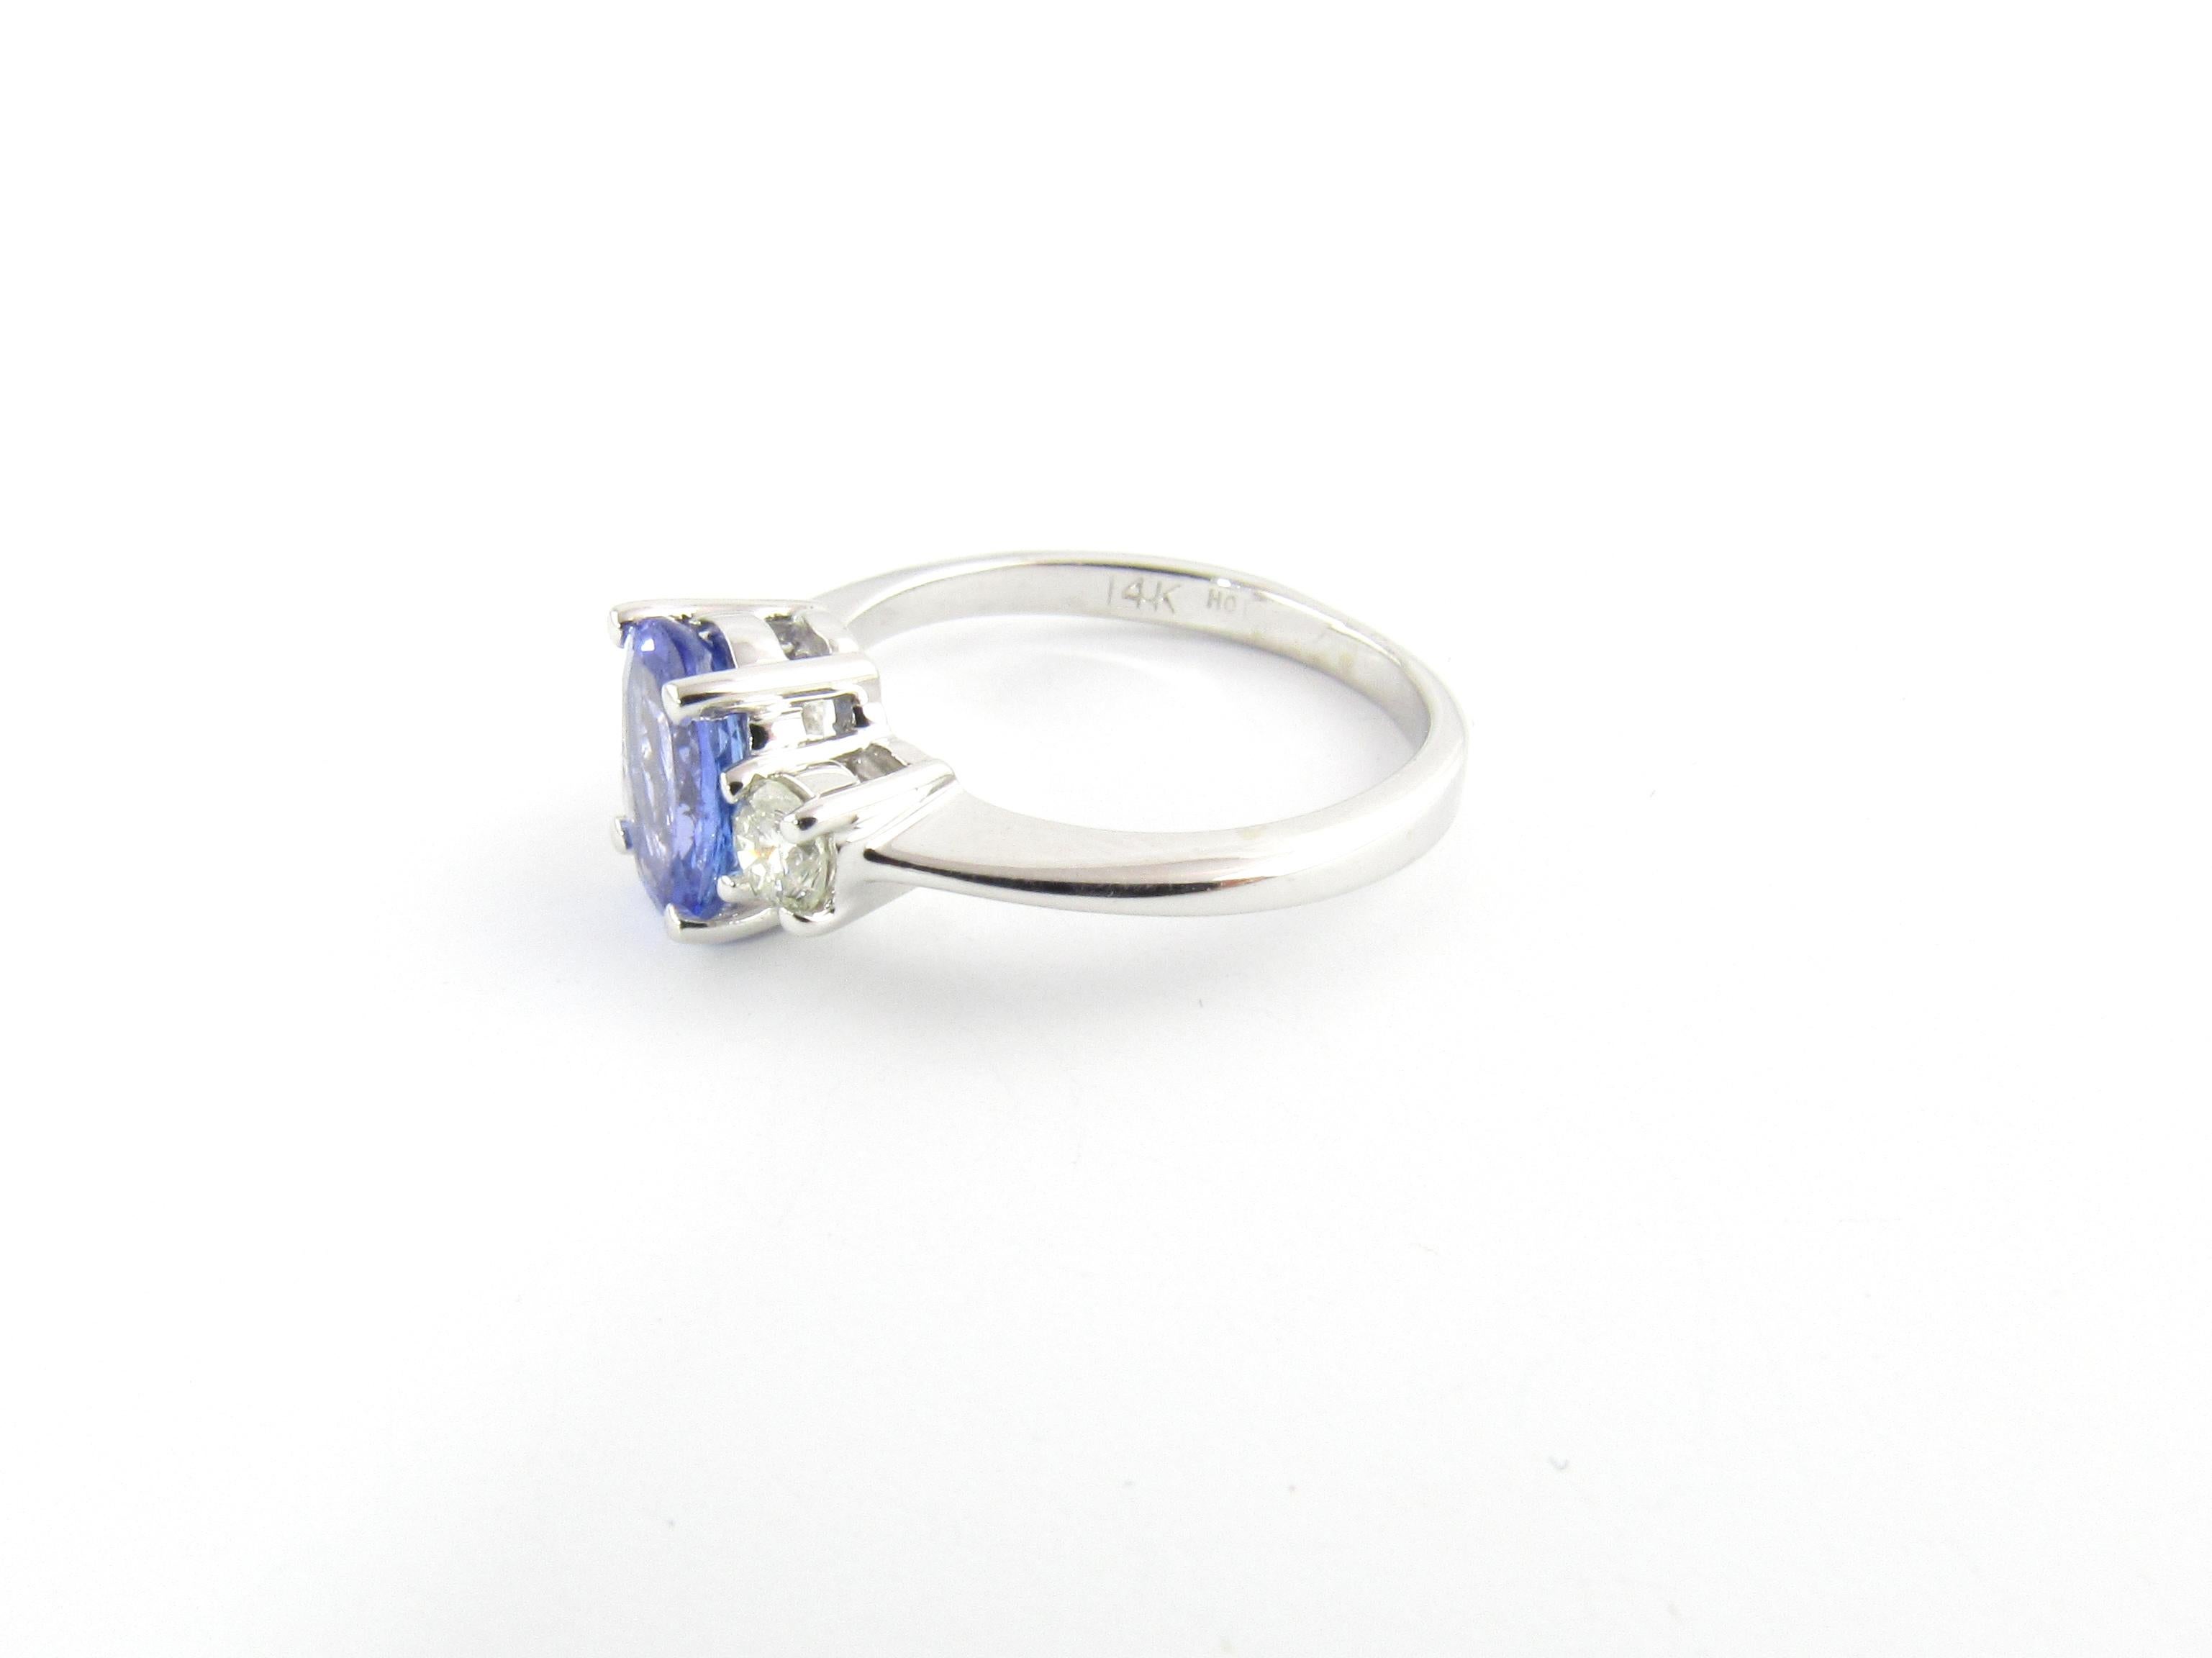 Vintage 14 Karat White Gold Tanzanite and Diamond Ring Size 5.25-

This lovely ring features one oval tanzanite (8 mm x 7 mm) and two round brilliant cut diamonds set in classic 14K white gold. Shank measures 2 mm.

Comes with Gemological Appraisal